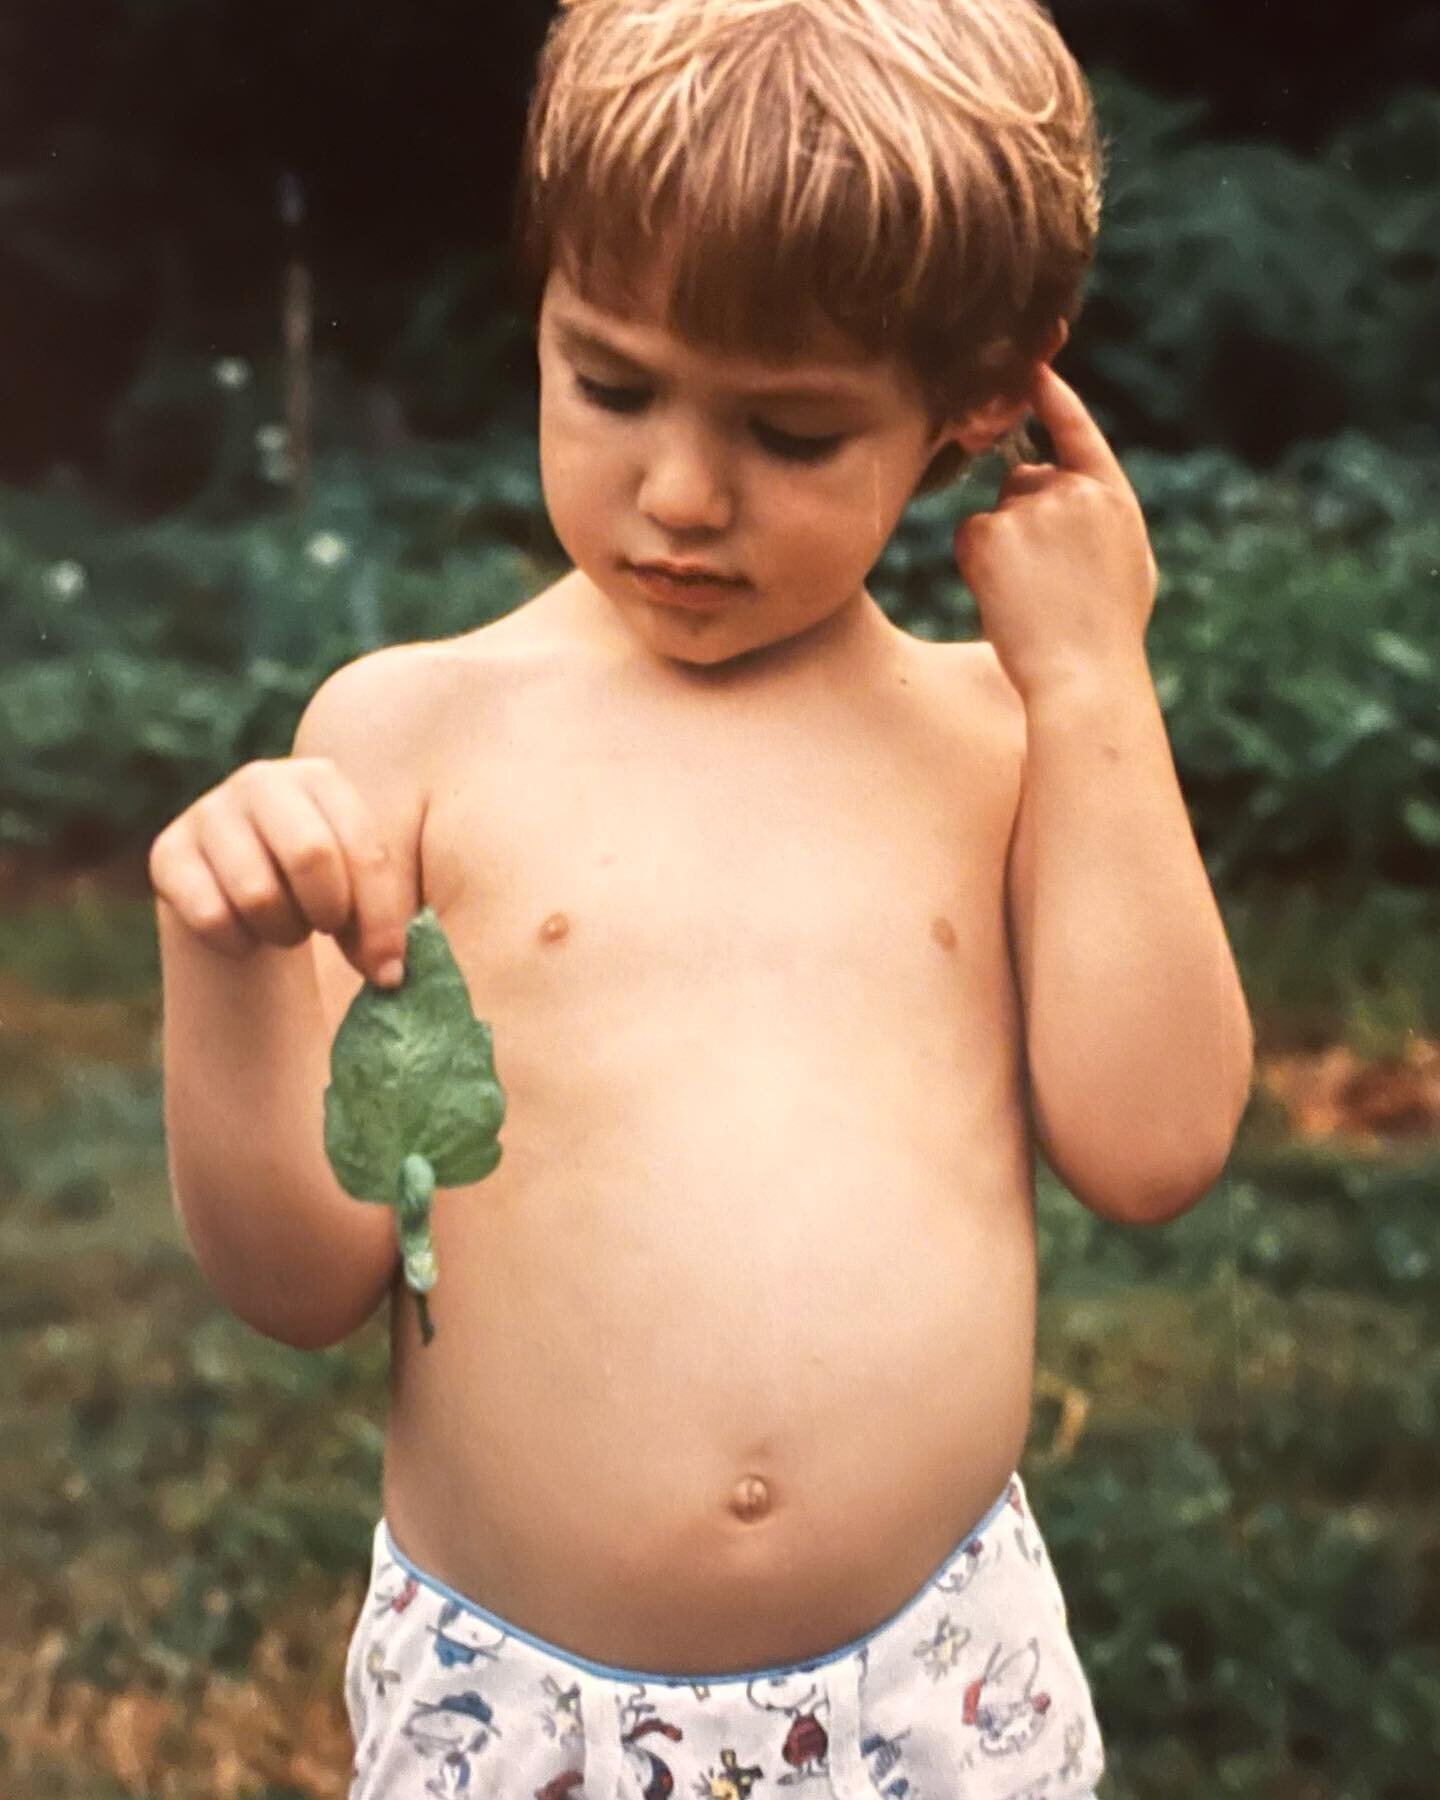 Flashback 30 years.  Ian is trying to figure out what is so bad with these cool looking tomato hornworms that his parents were removing; an early lesson that not all choices are black and white.  As a little guy he had a passionate interest in nature